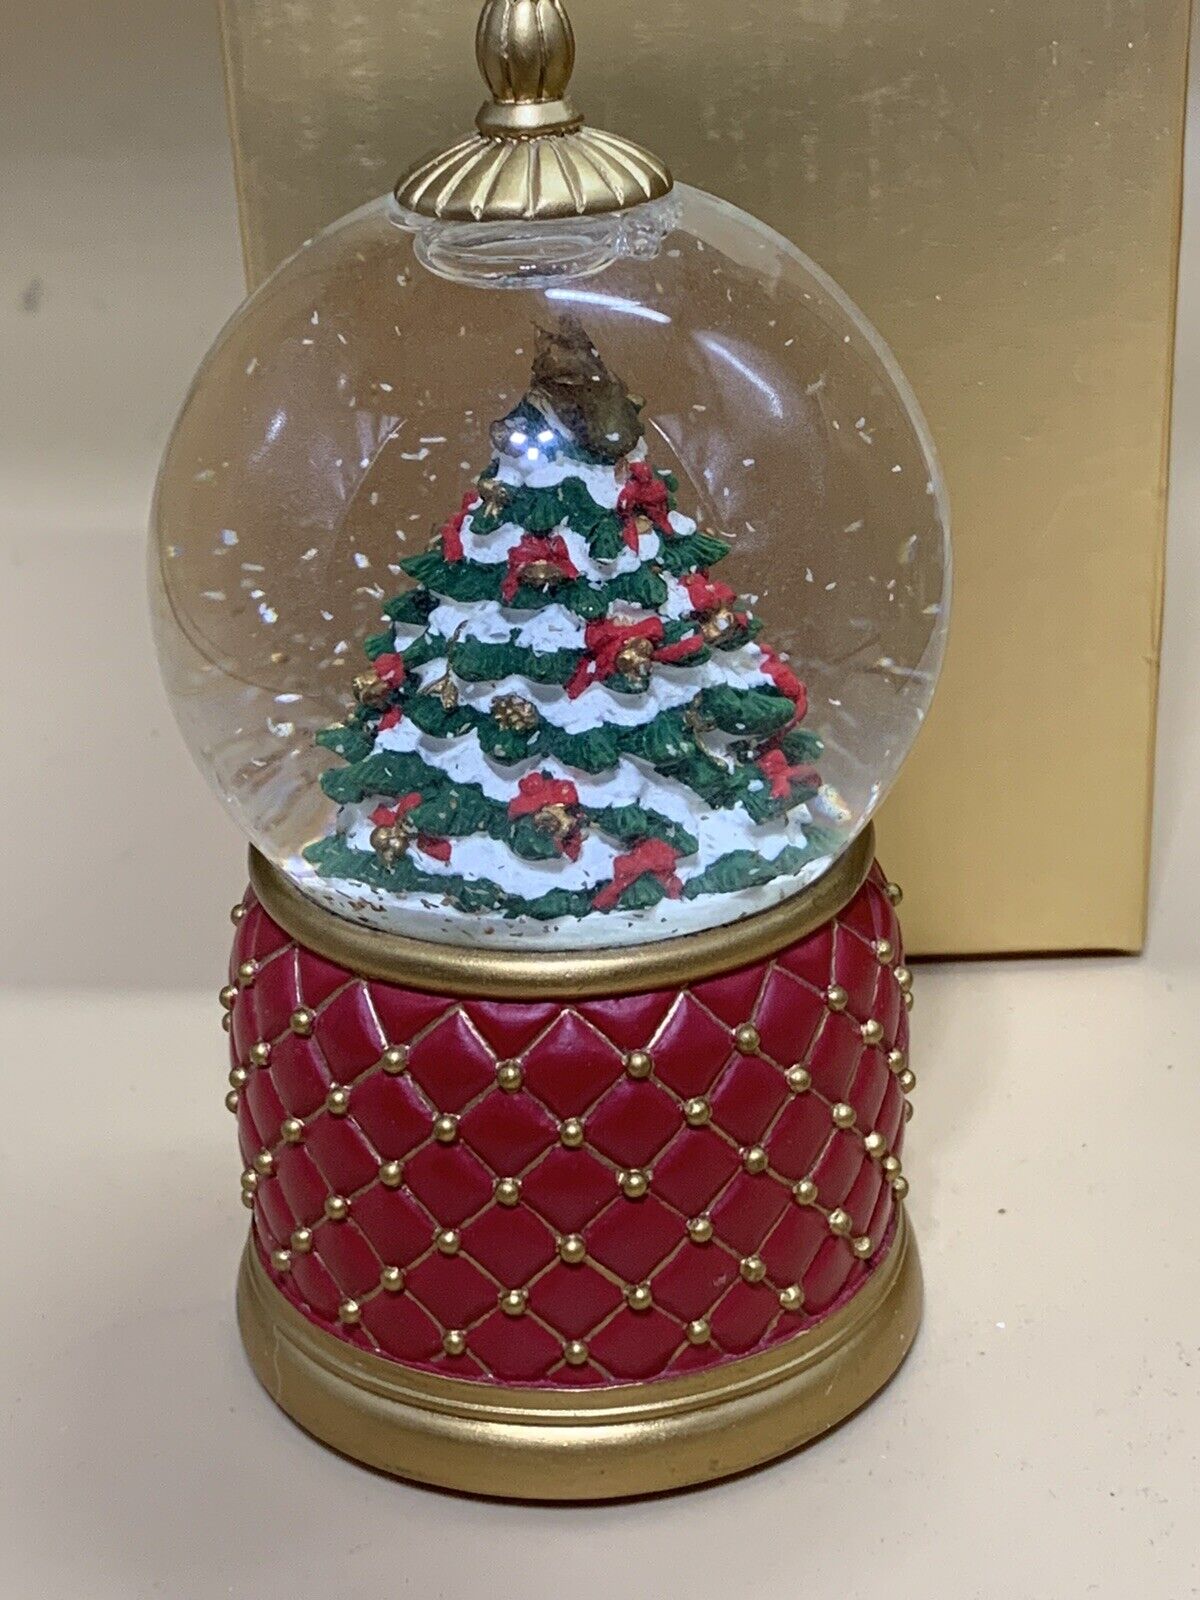 VERY PRETTY MR CHRISTMAS SNOWGLOBE THAT LIGHTS UP AND HAS MUSIC